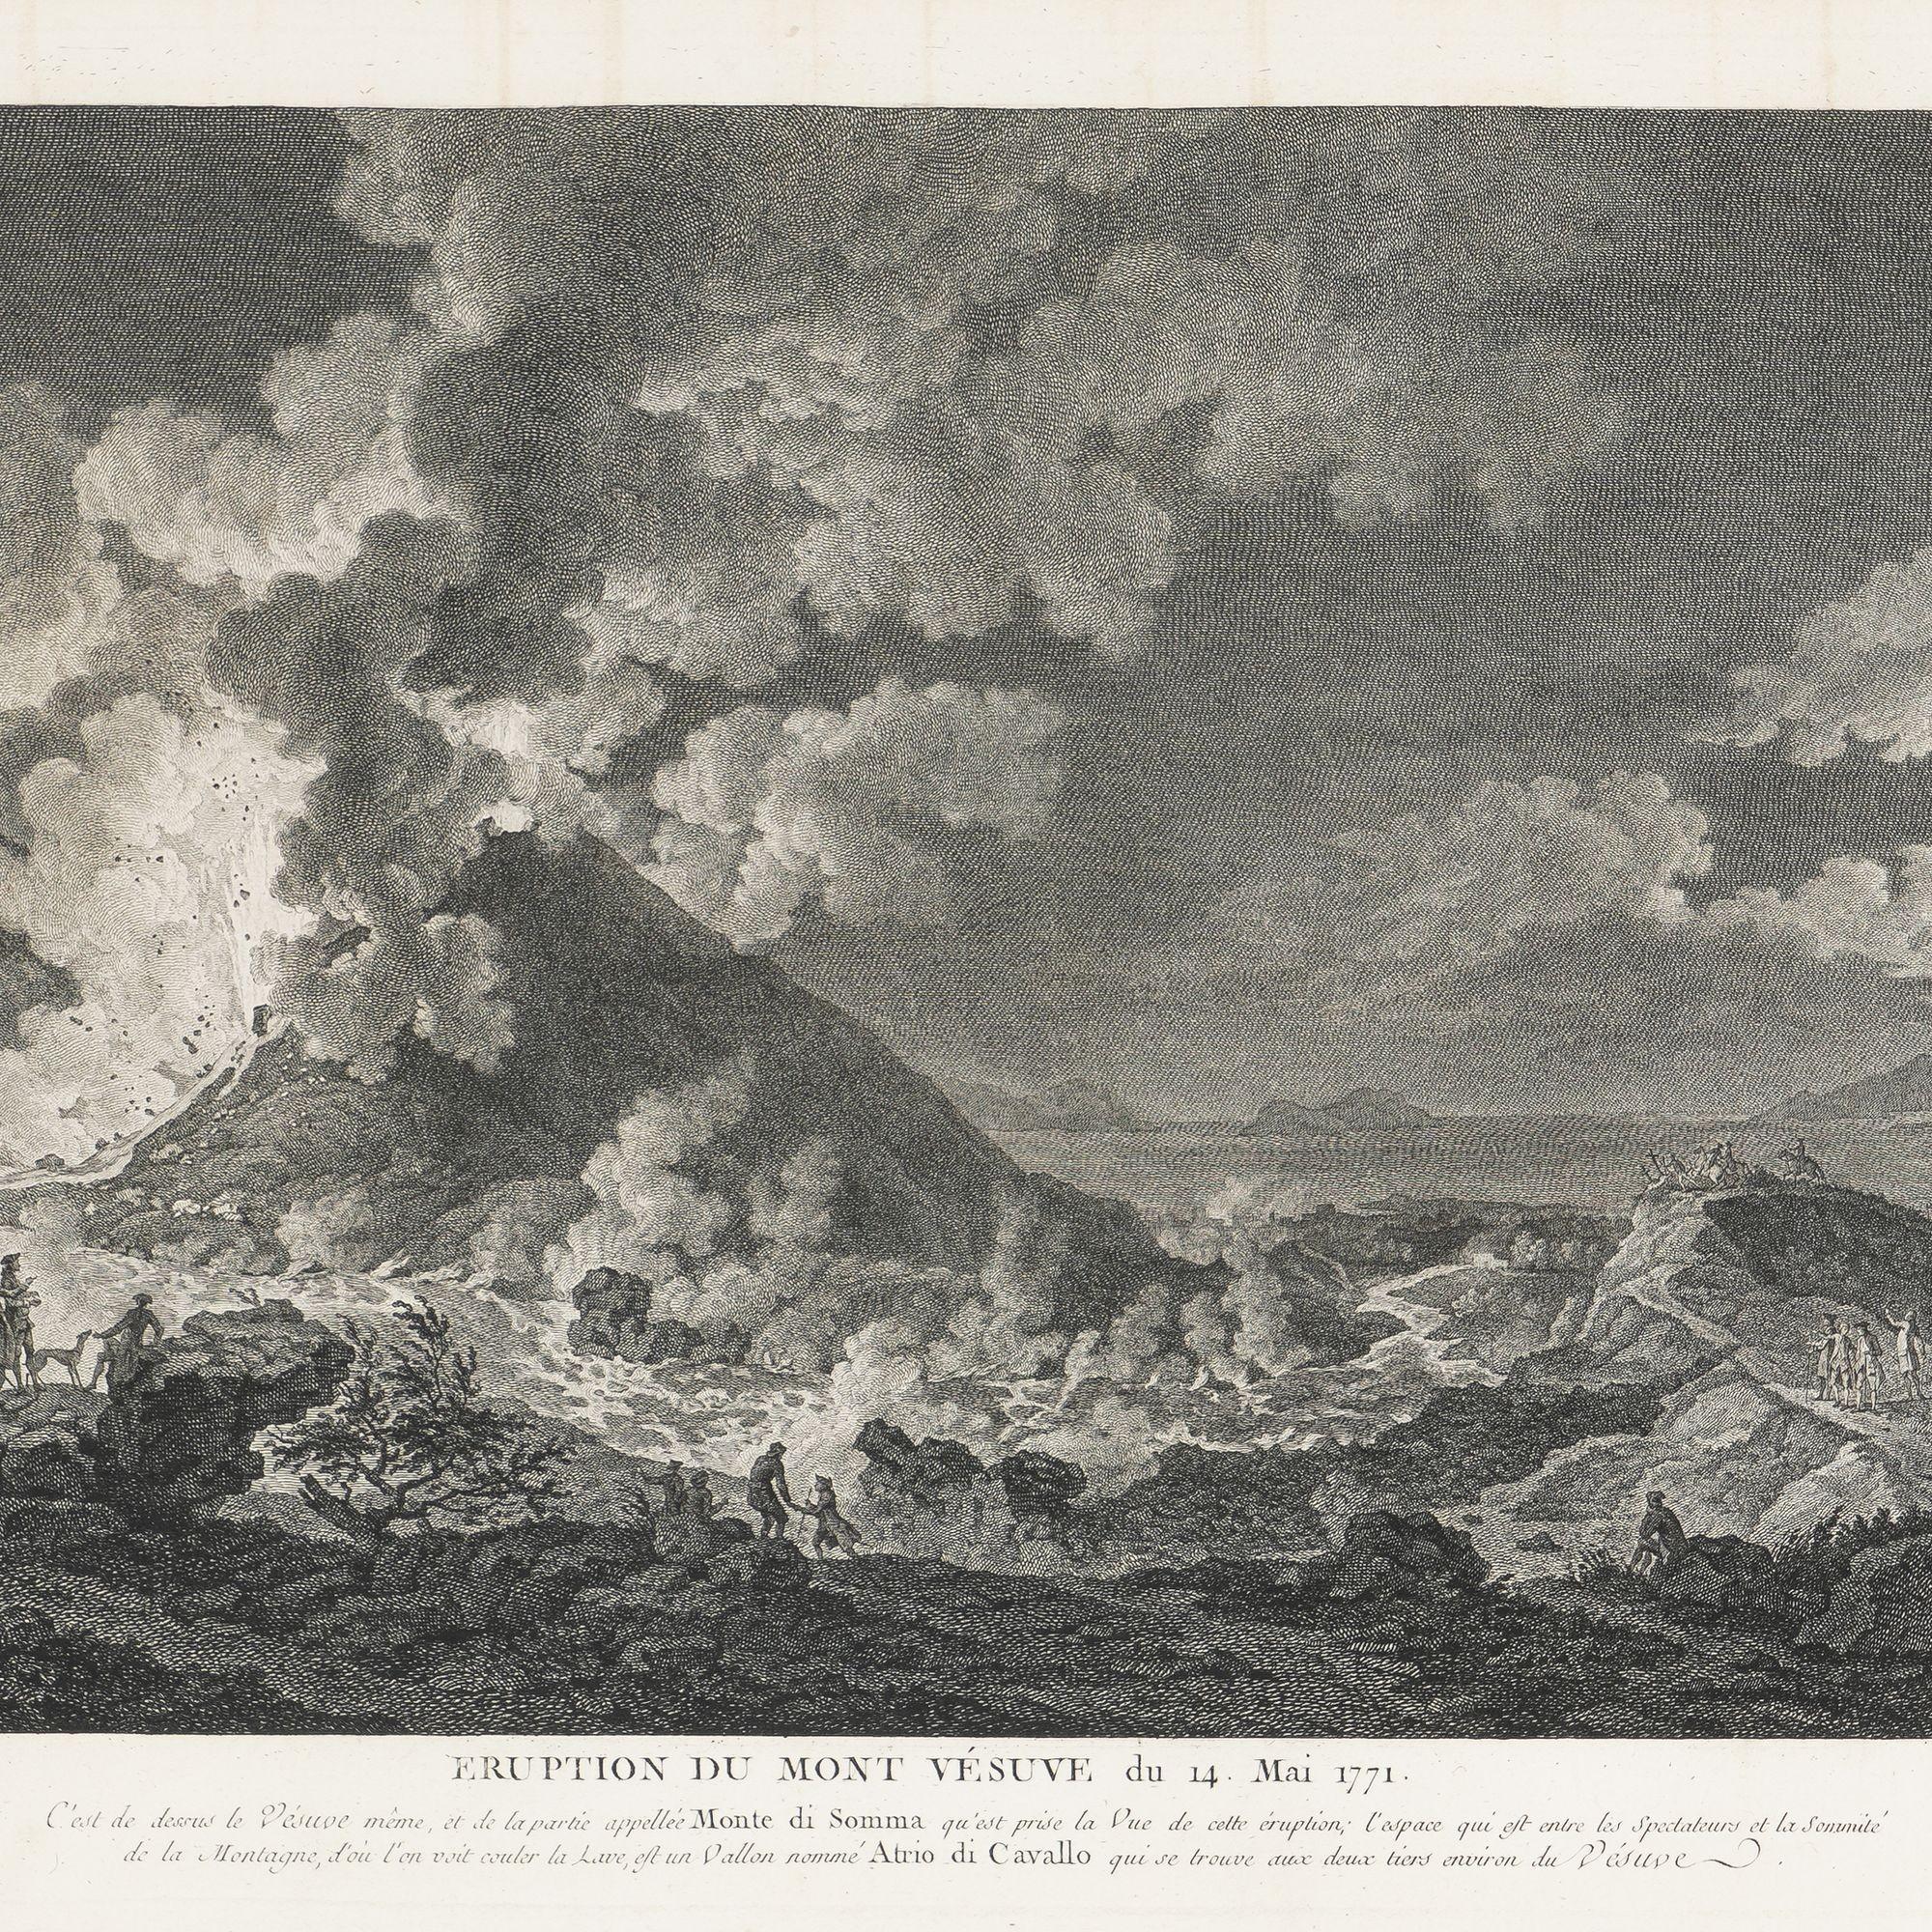 The Eruption of Vesuvius 14 May 1771 by Heinrich Guttenberg, c. 1800 In Good Condition For Sale In Kenilworth, IL